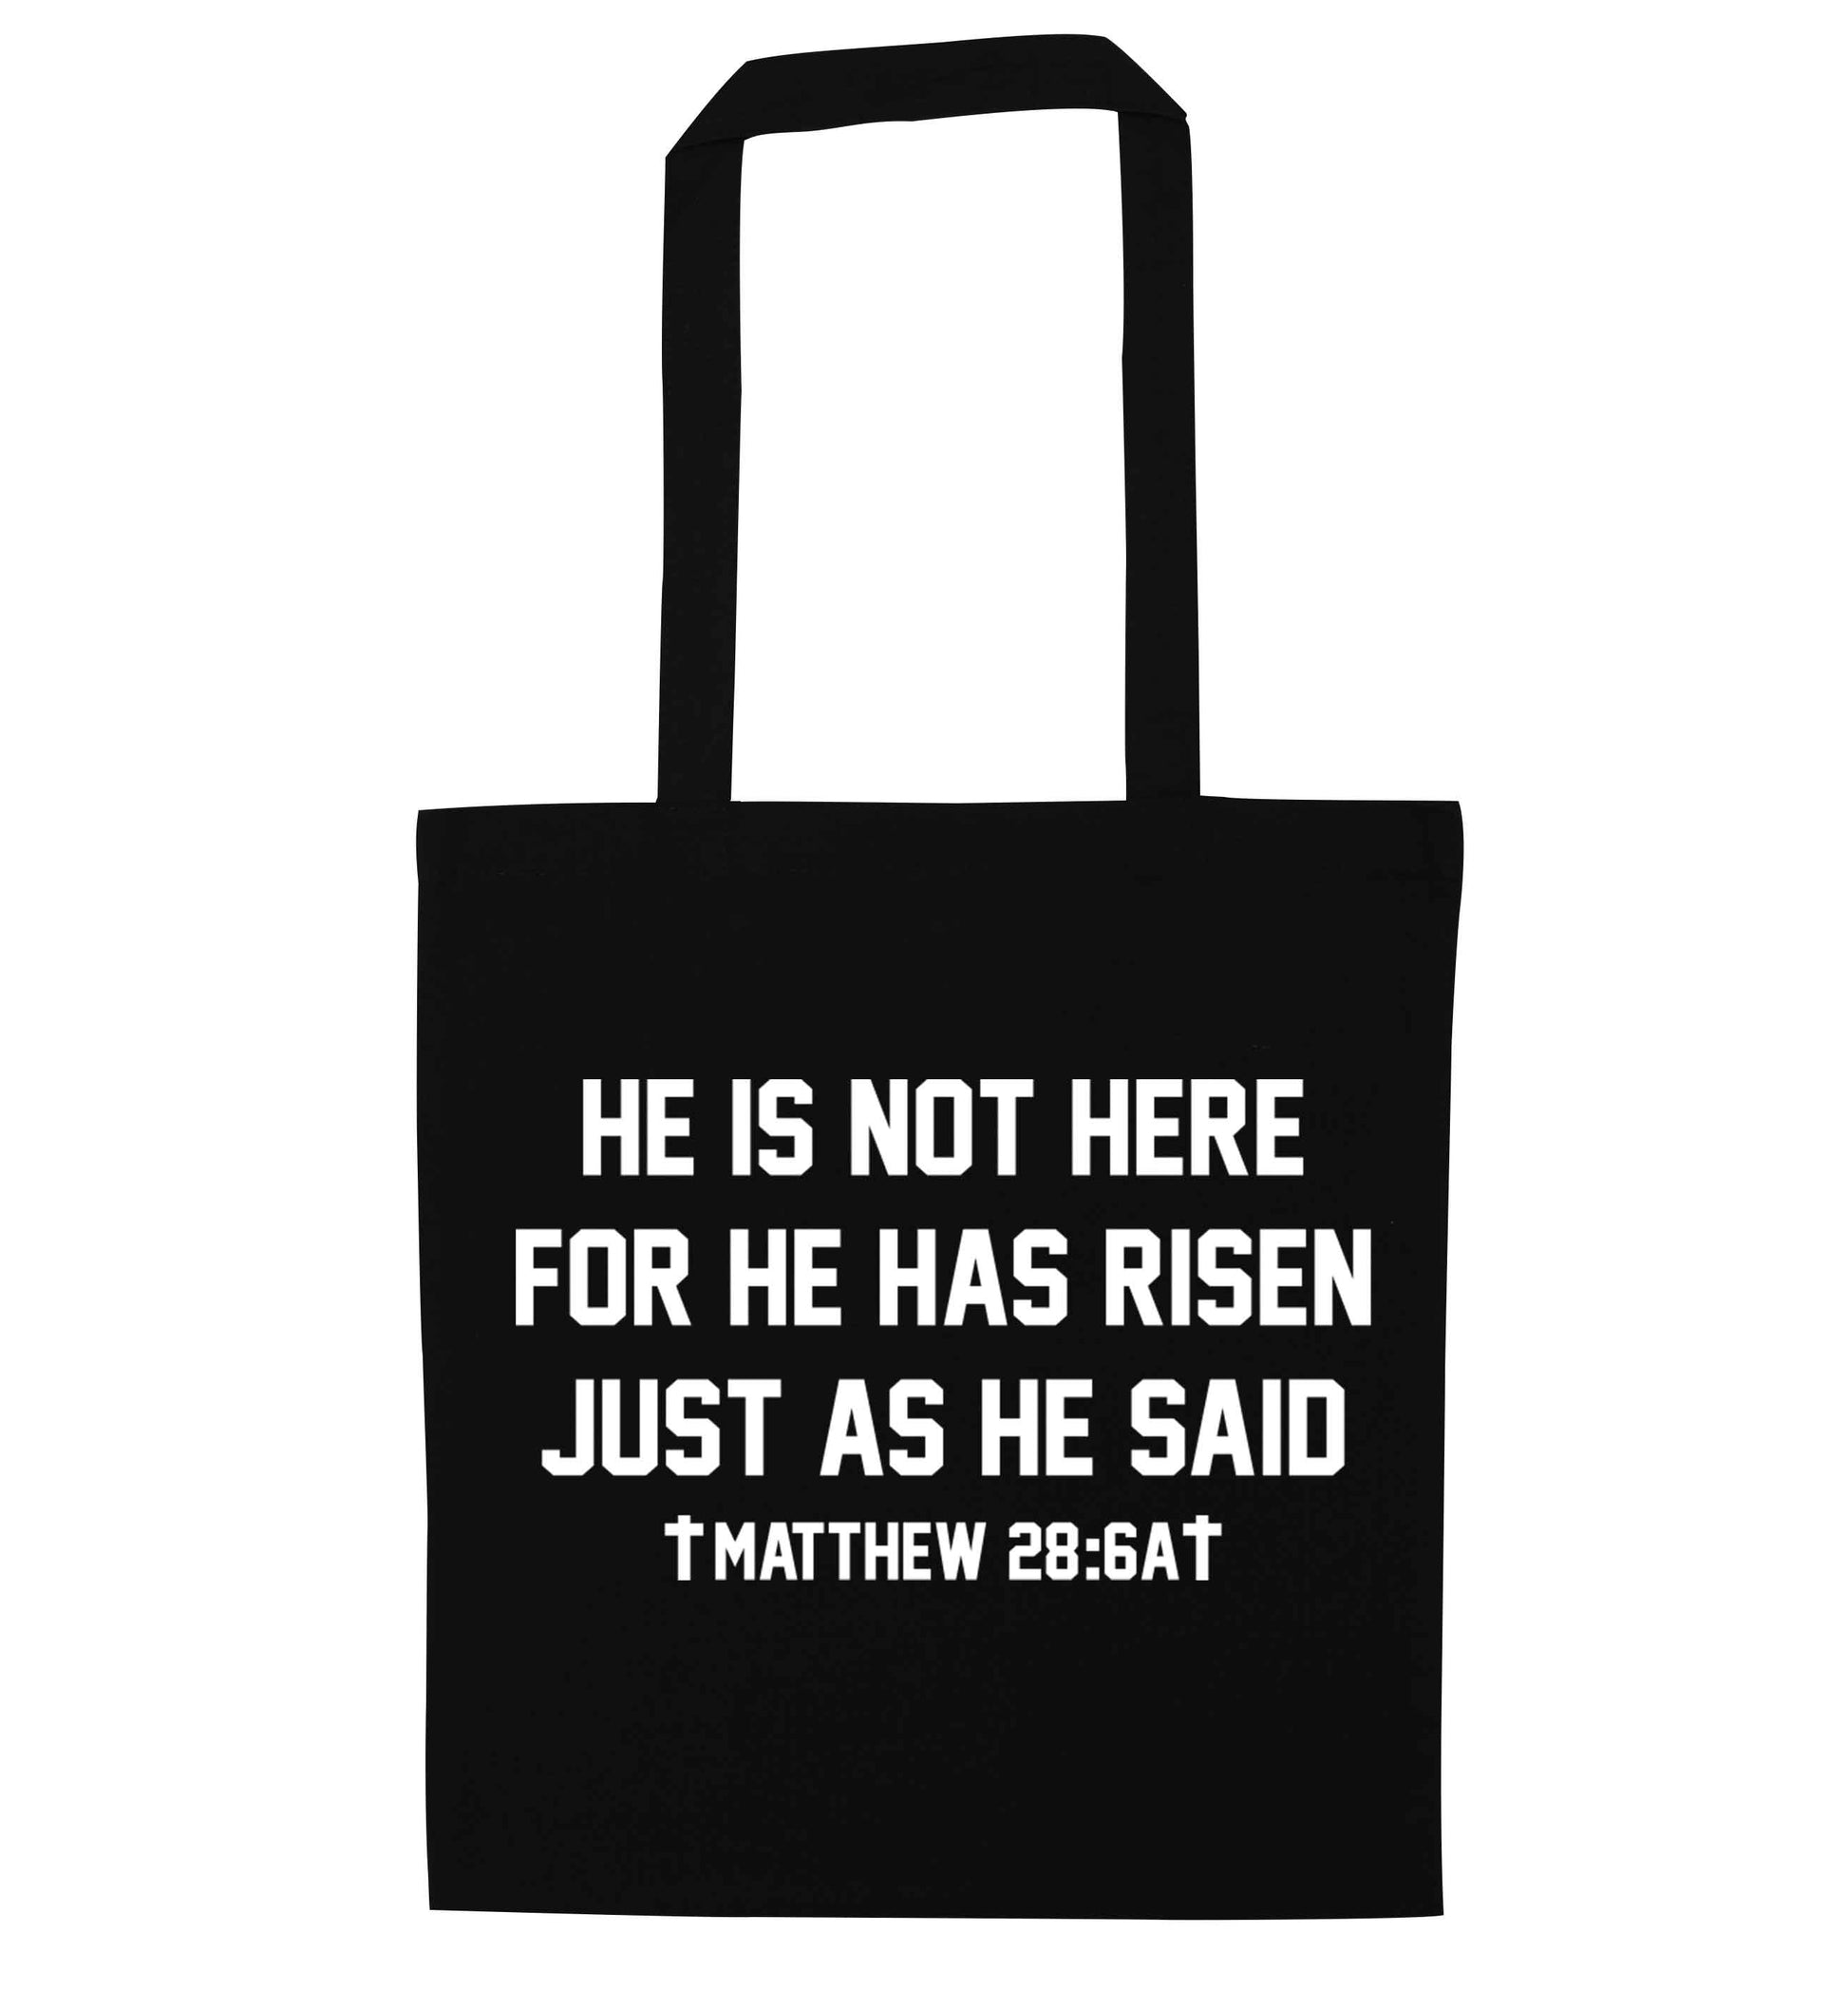 He is not here for he has risen just as he said matthew 28:6A black tote bag